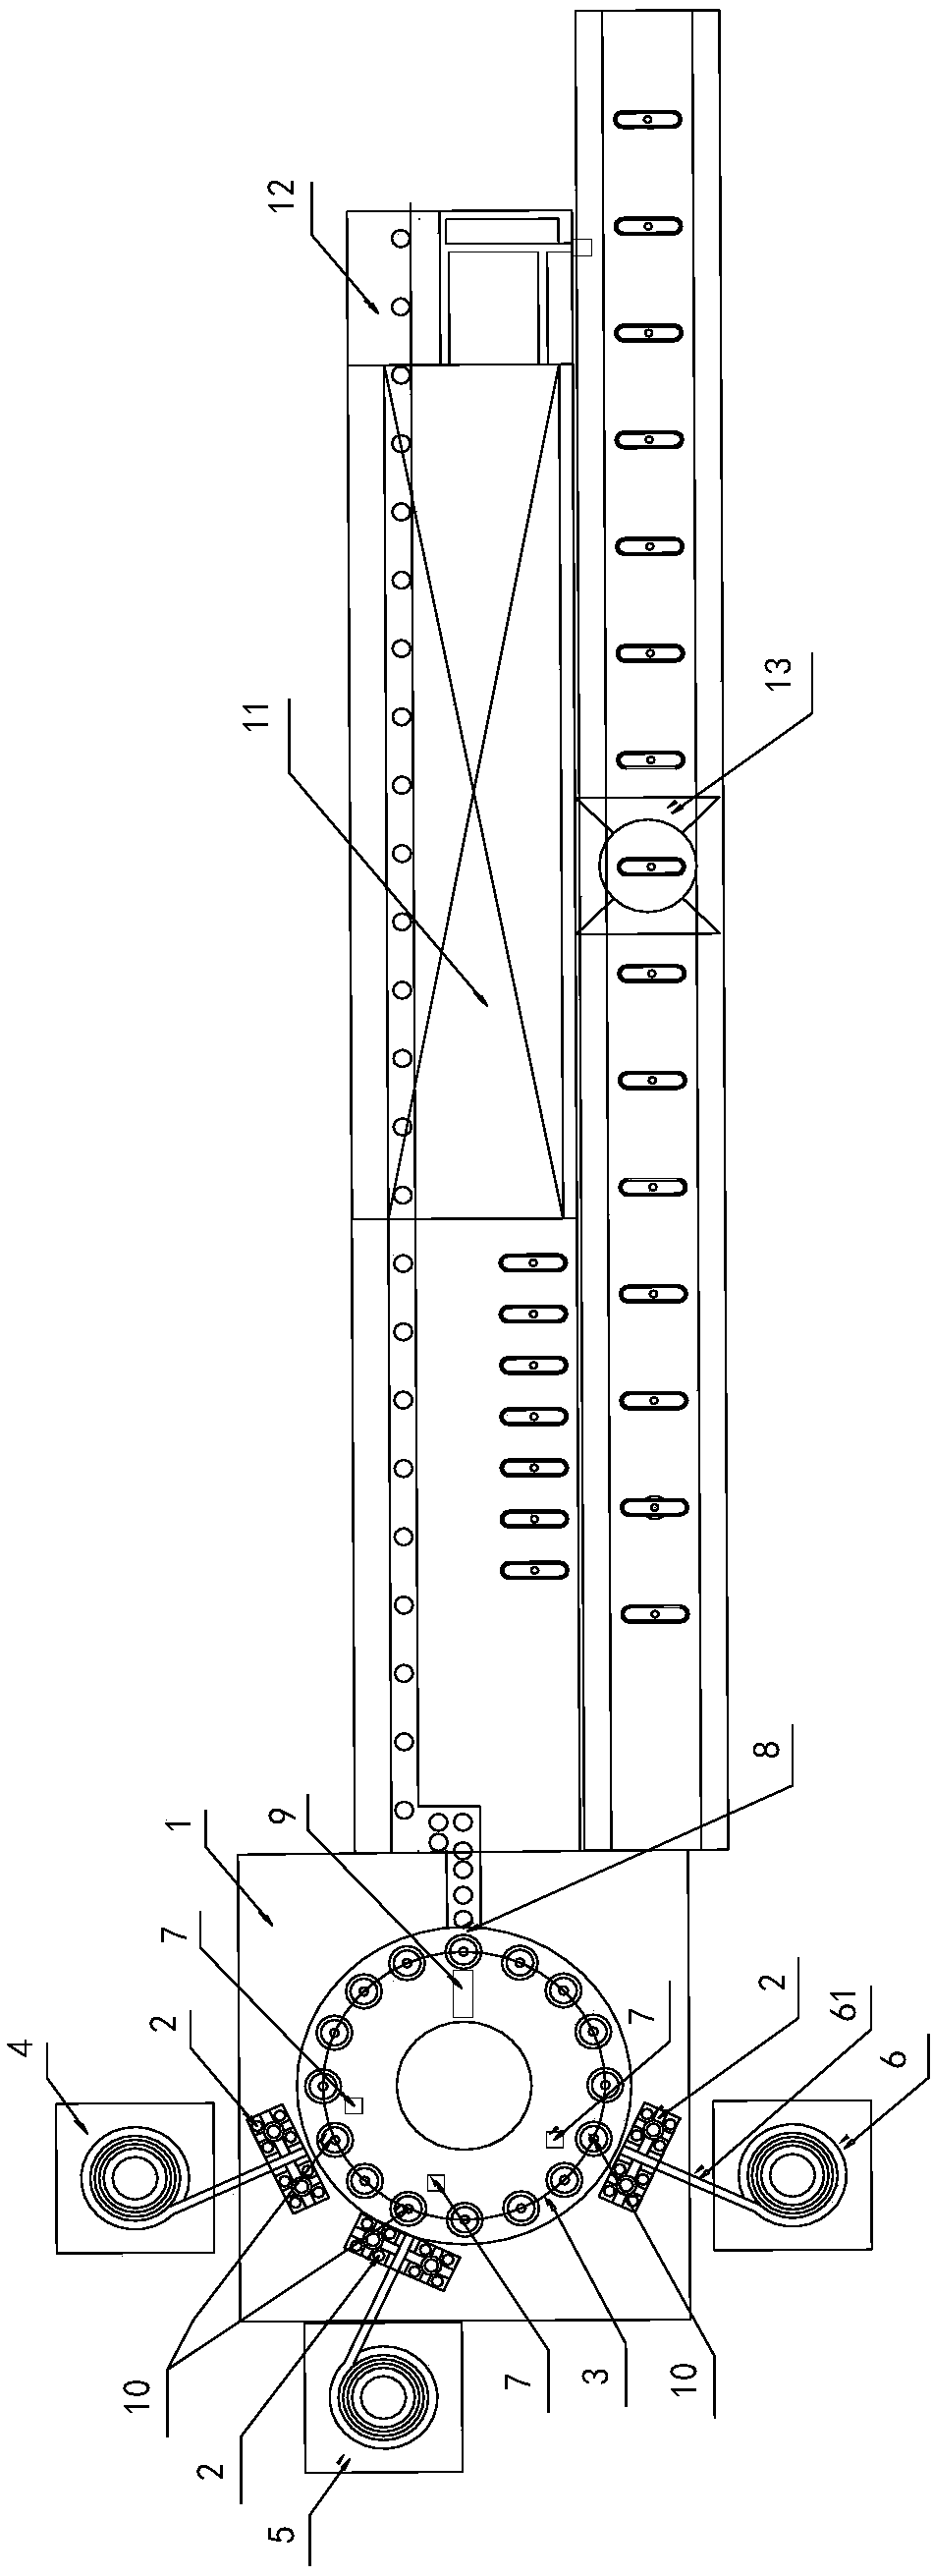 Full-automatic horn internal magnetic circuit assembly molding device